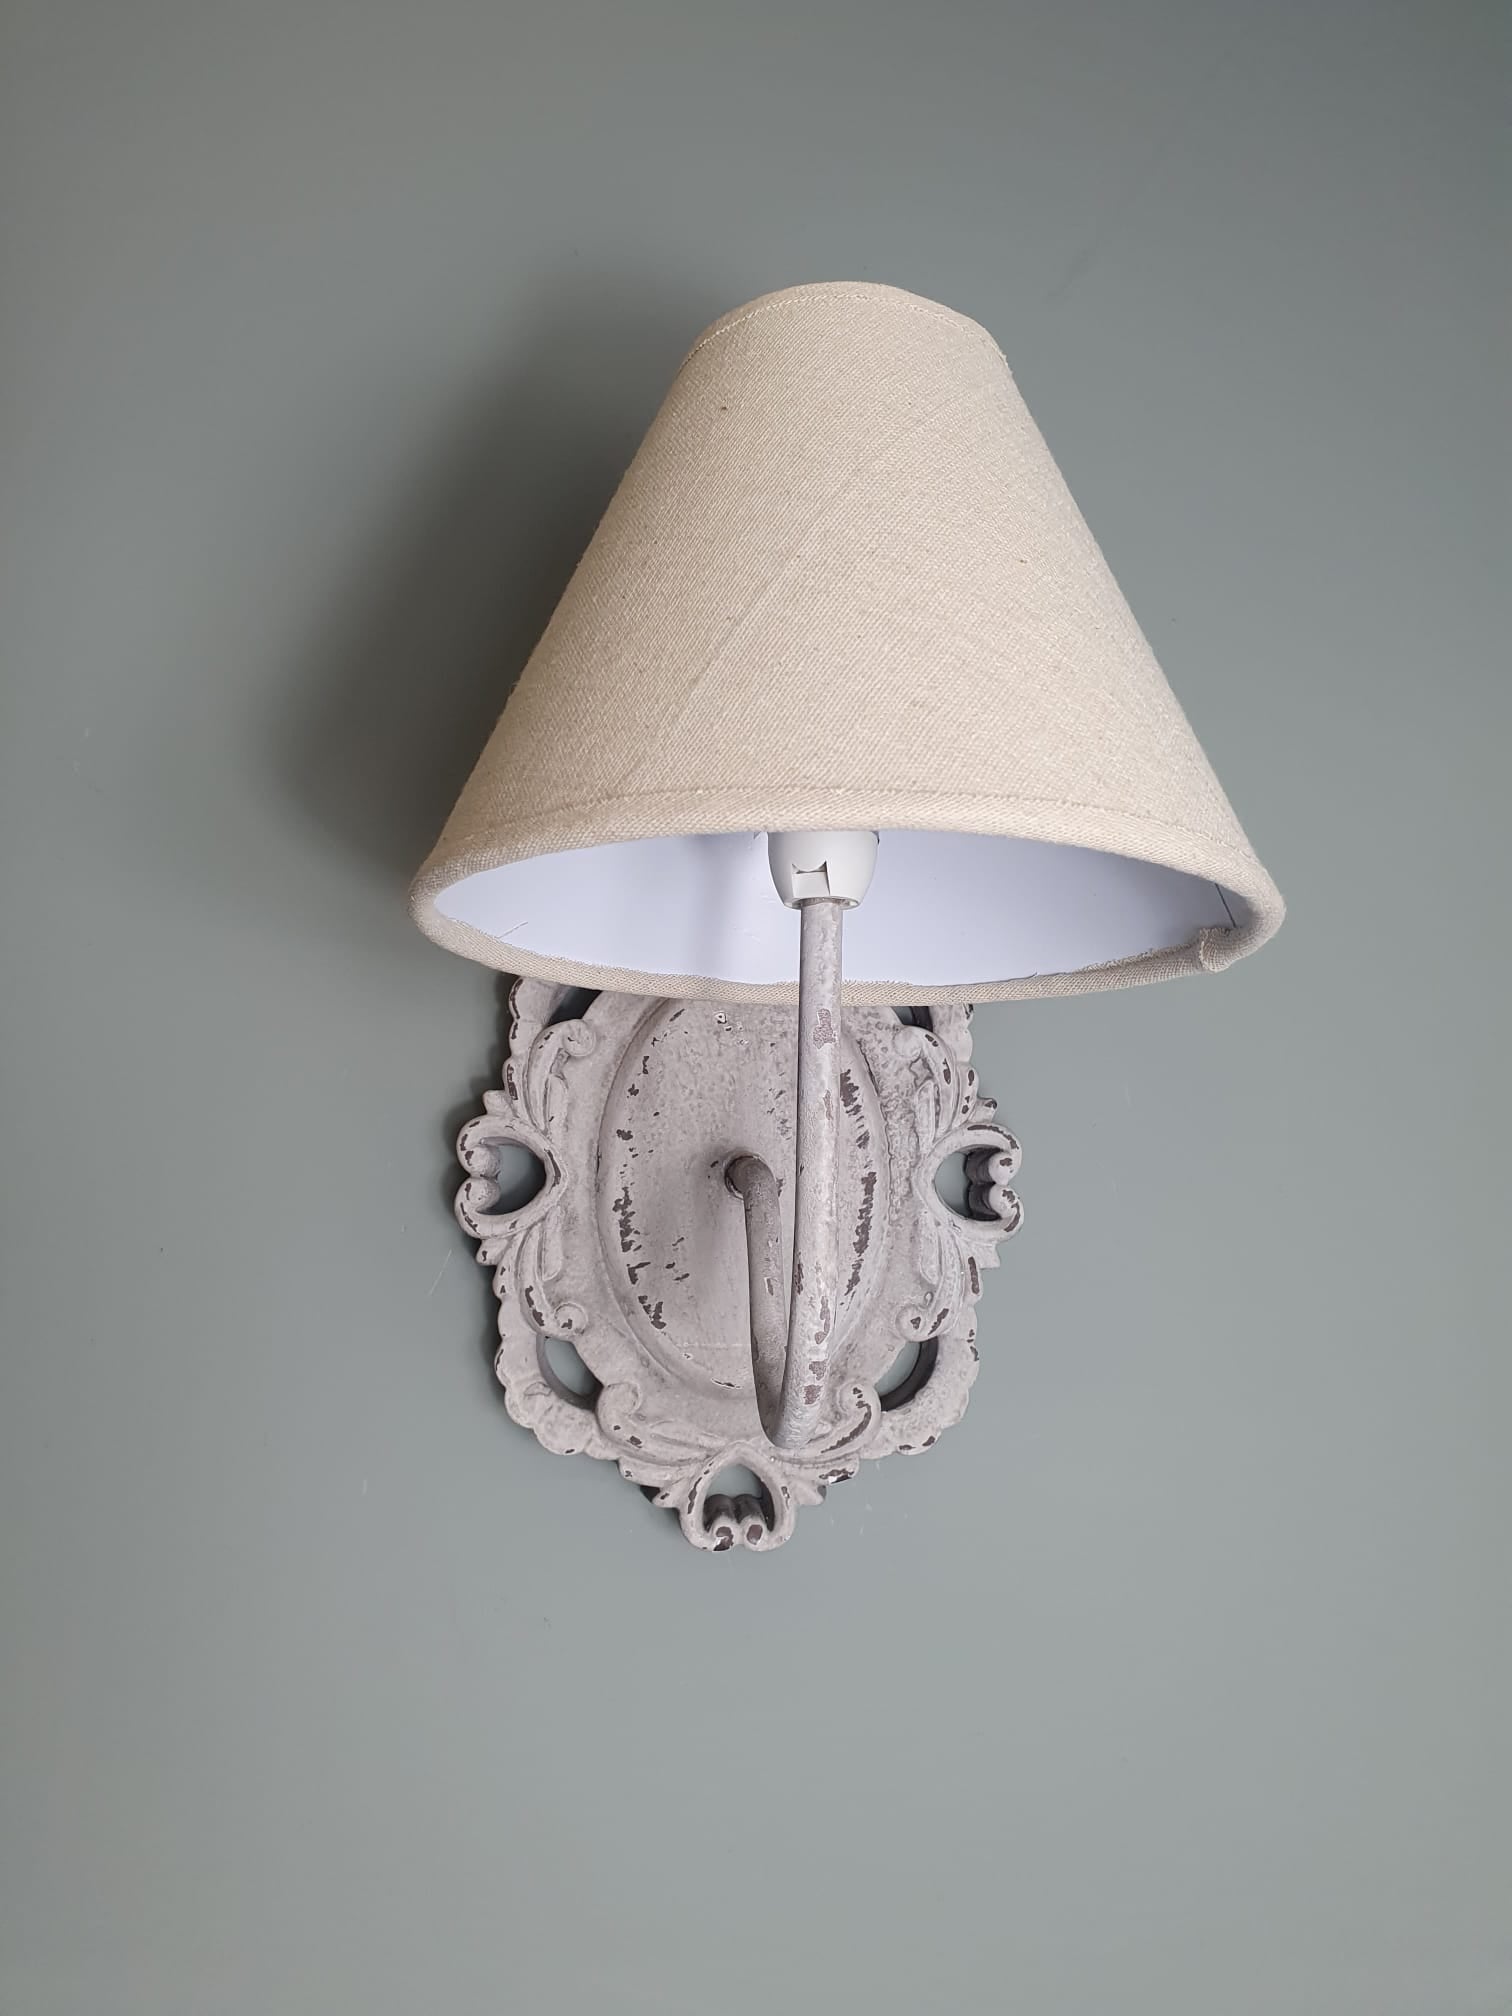 French style wall light with shade